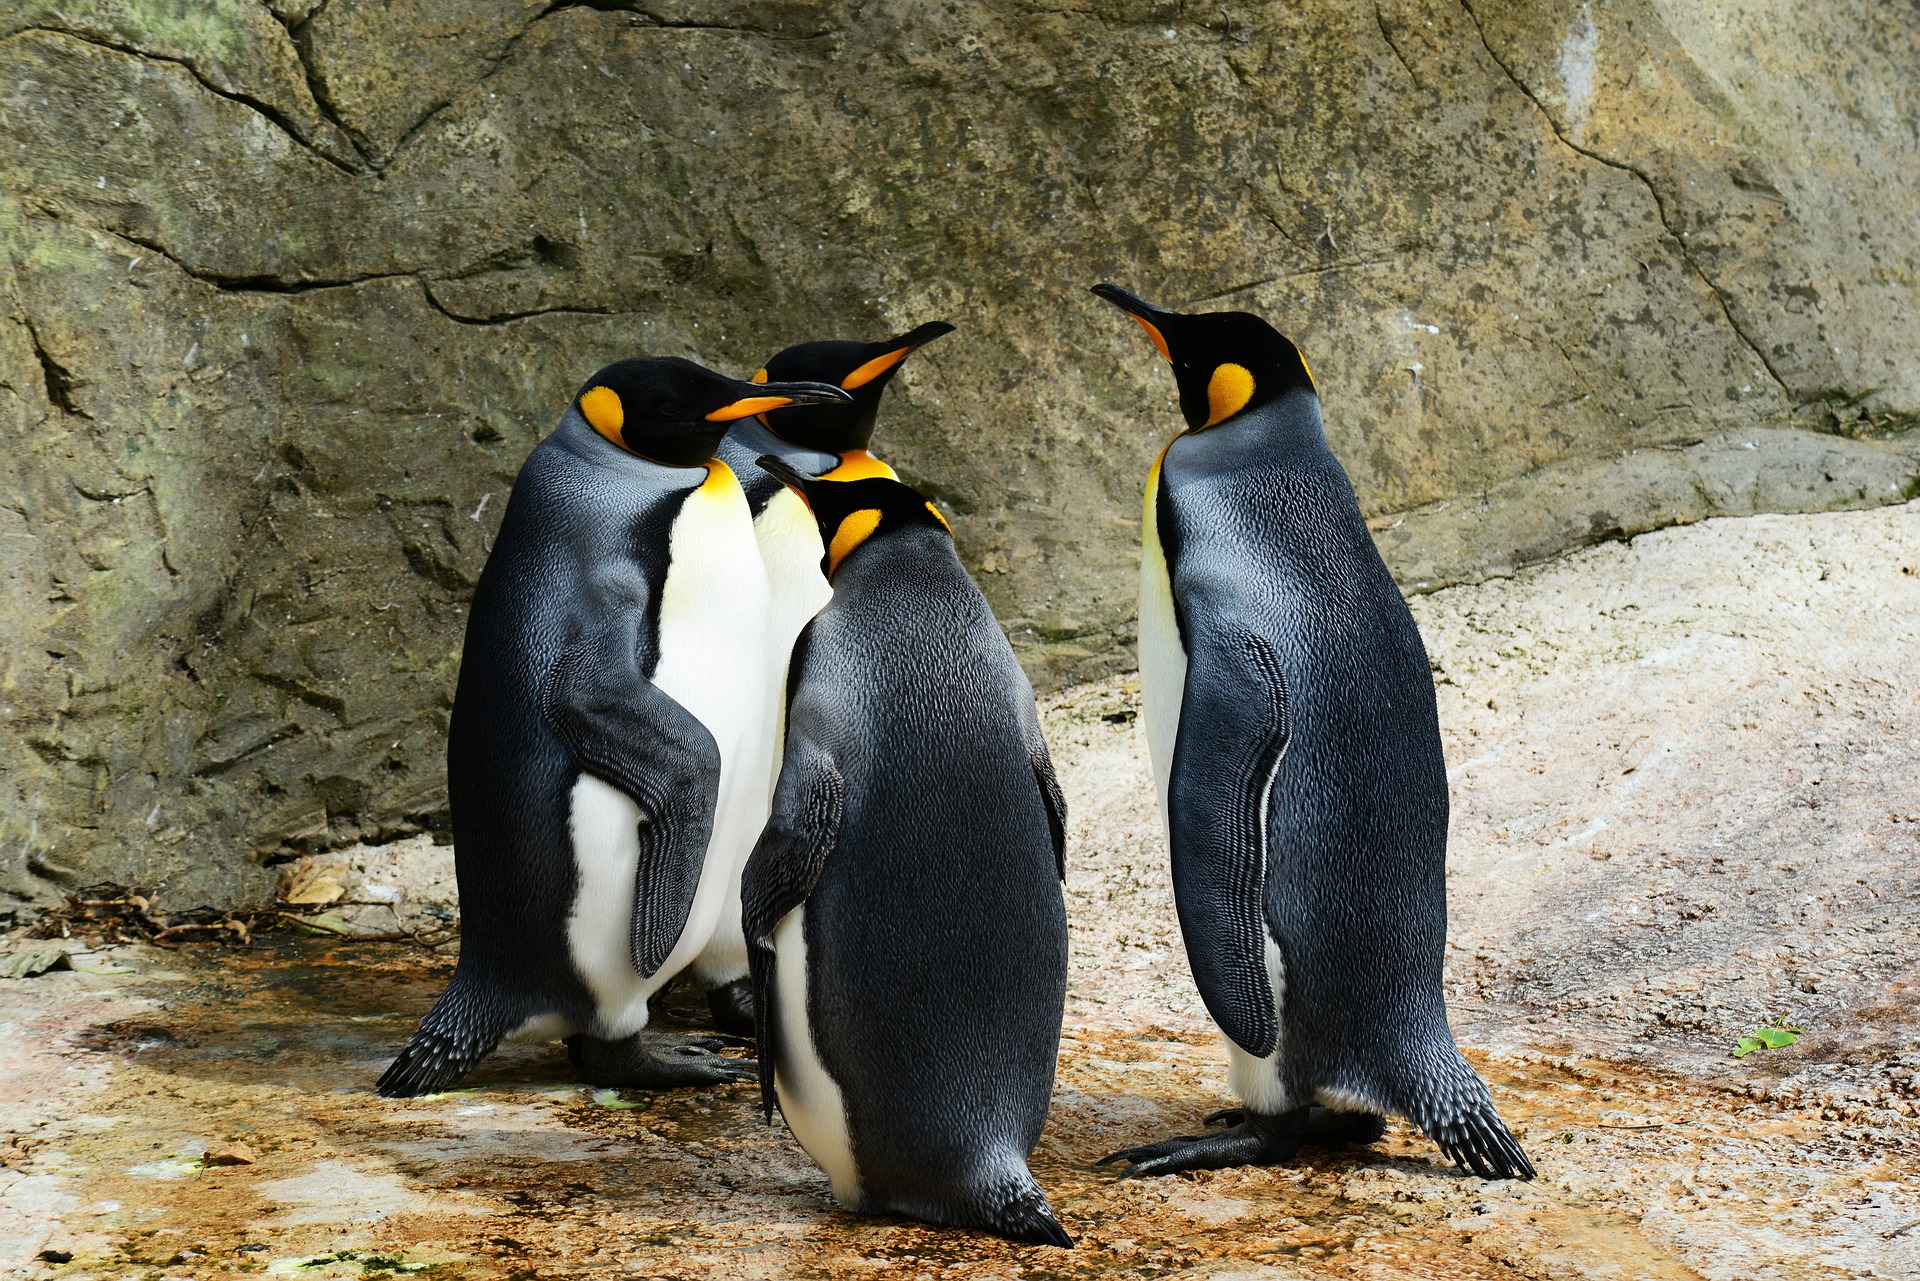 A group of penguins.